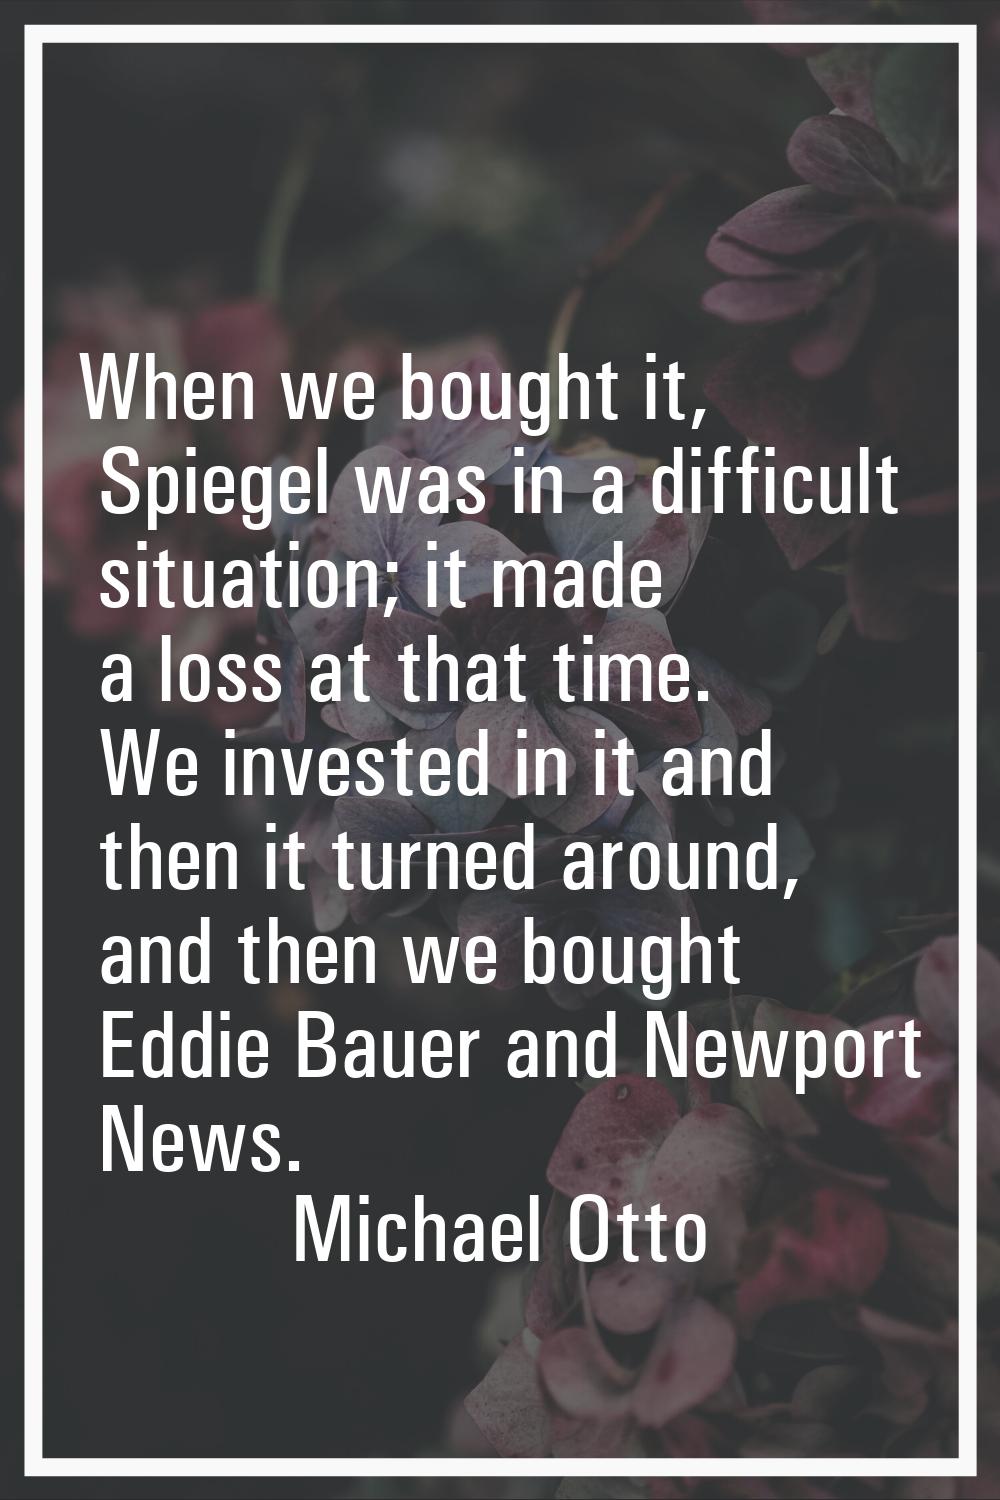 When we bought it, Spiegel was in a difficult situation; it made a loss at that time. We invested i